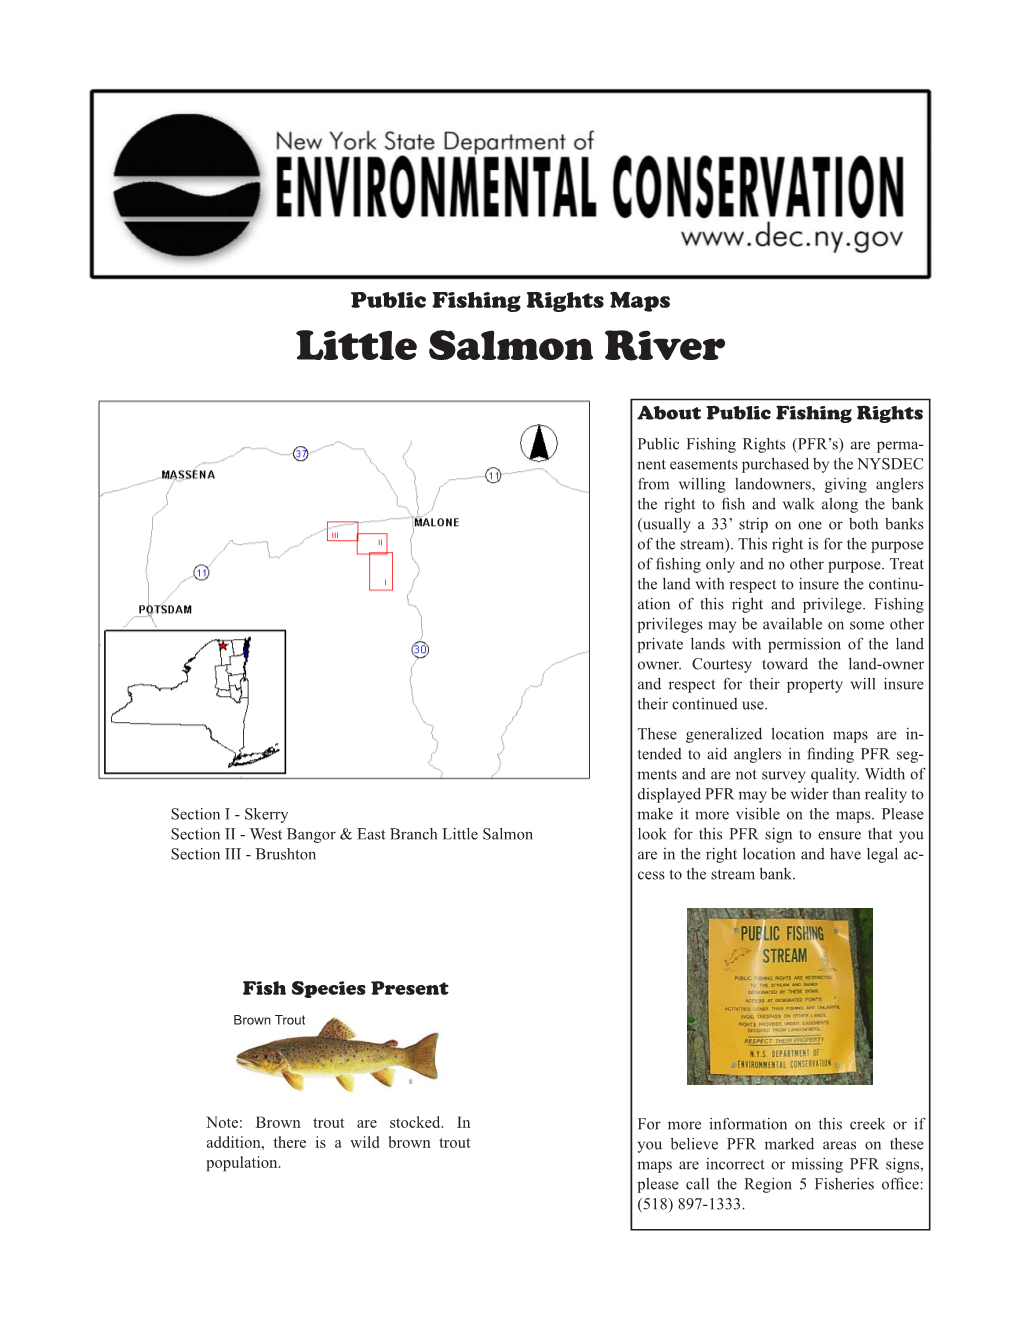 Public Fishing Rights Maps: Little Salmon River